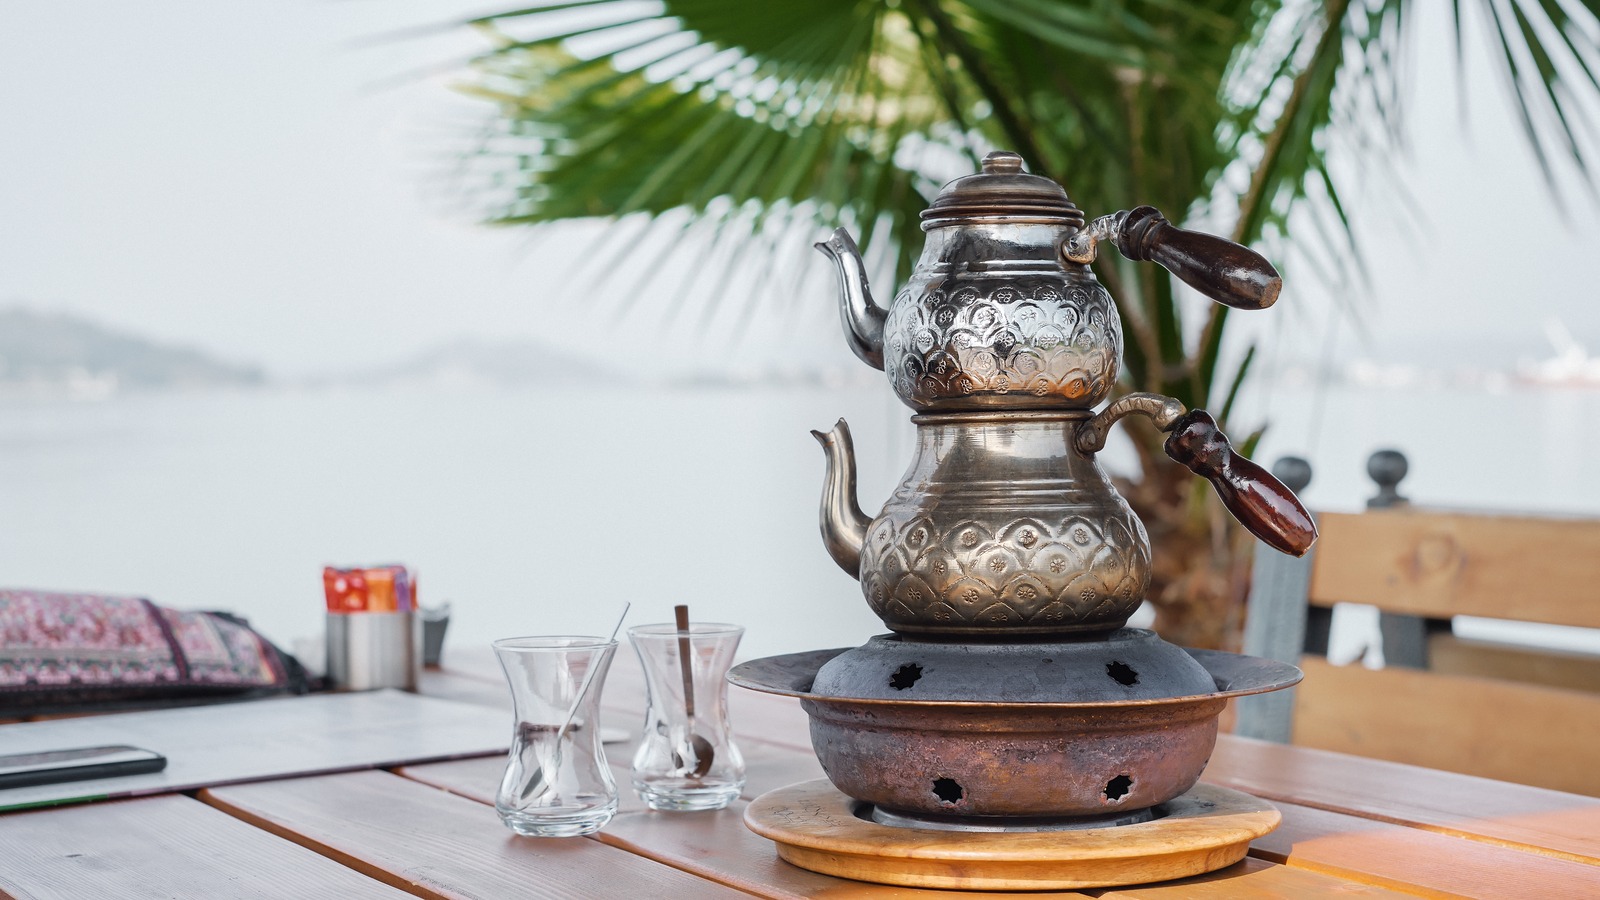 How To Make Turkish Tea Without Double Teapot